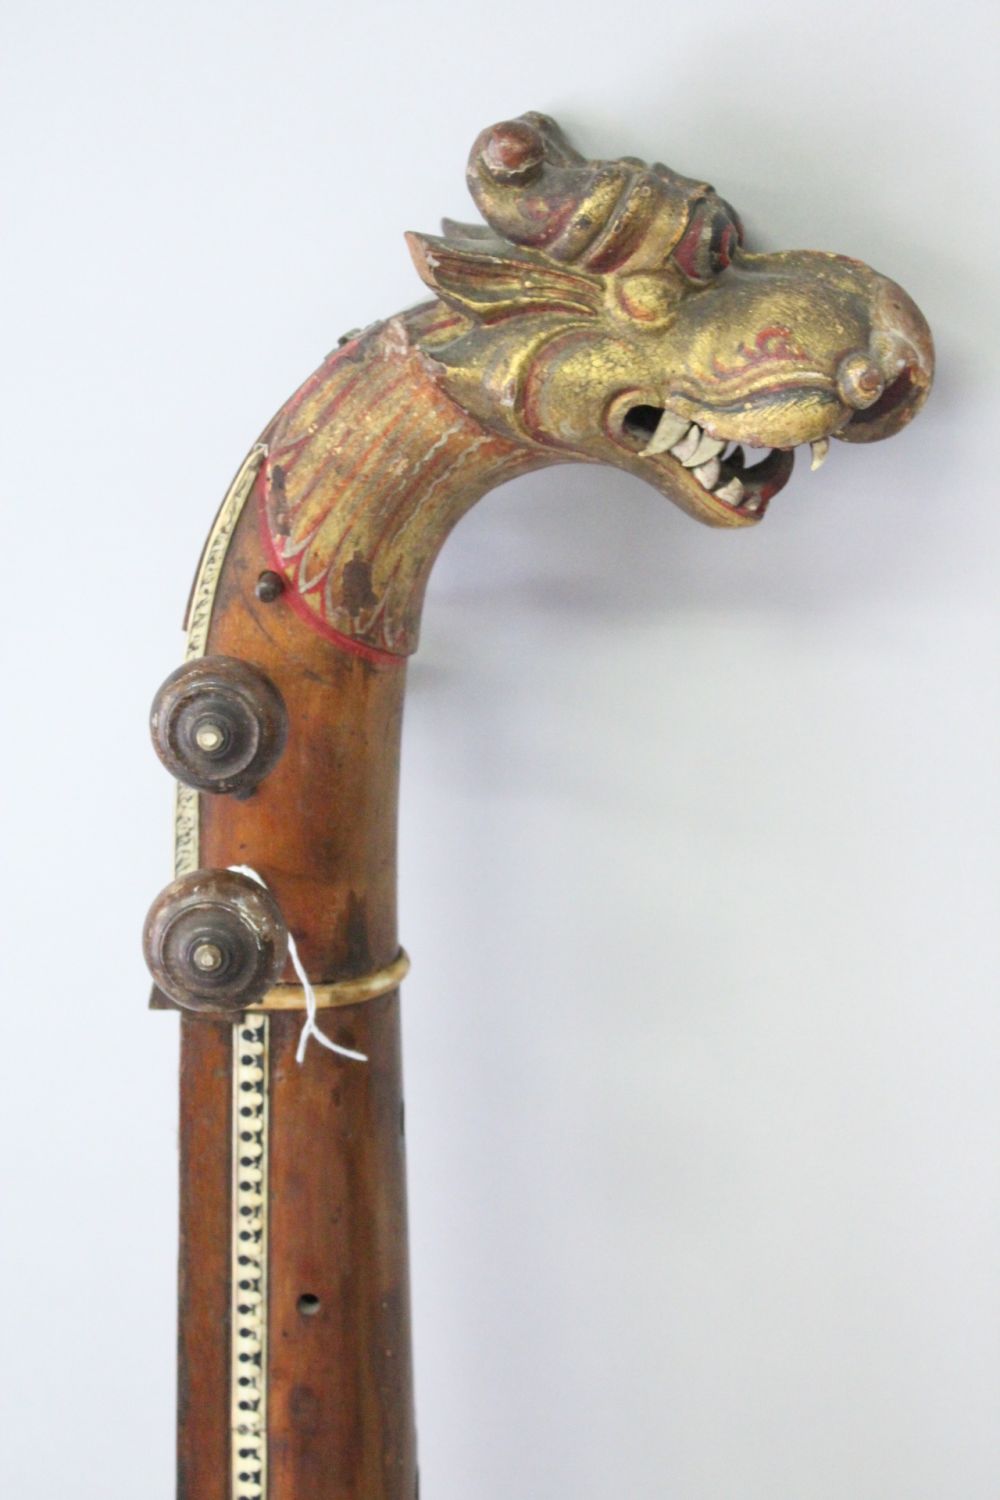 A LARGE 17TH CENTURY SOUTH INDIAN SITAR with carved dragon handle, 120cm long. - Image 2 of 5